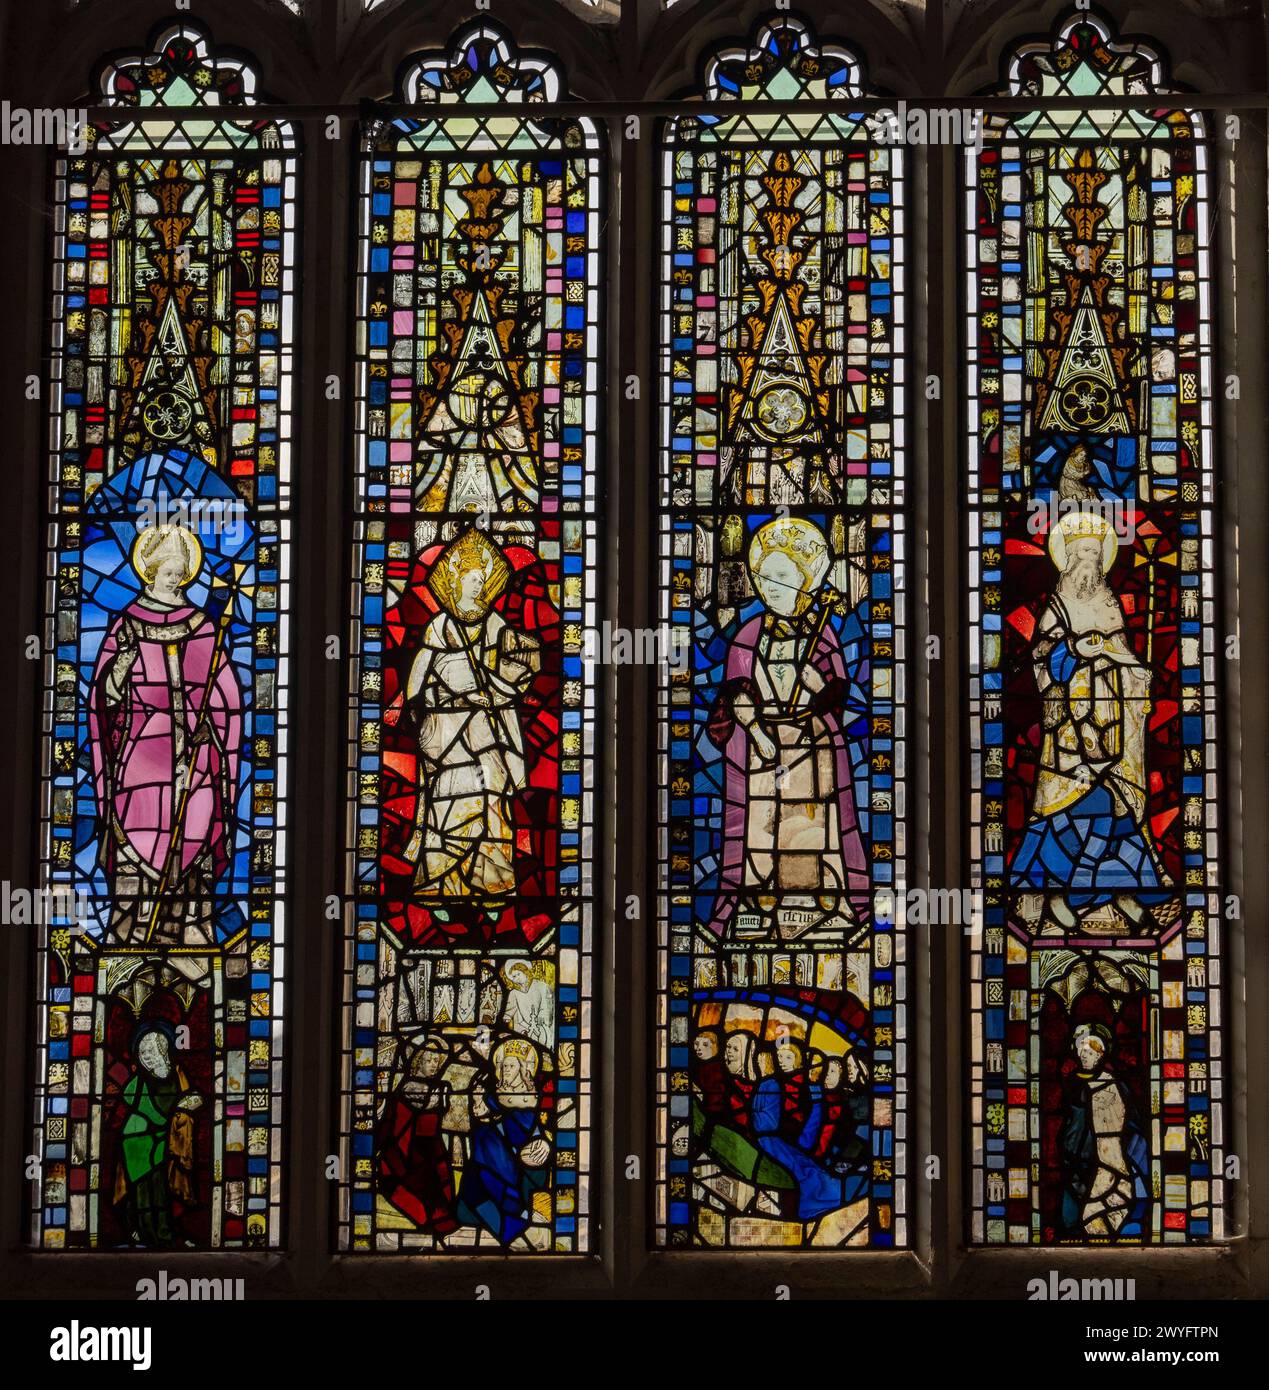 stained glass, west window, 14th-16th centuries, St Helens, York, England Stock Photo